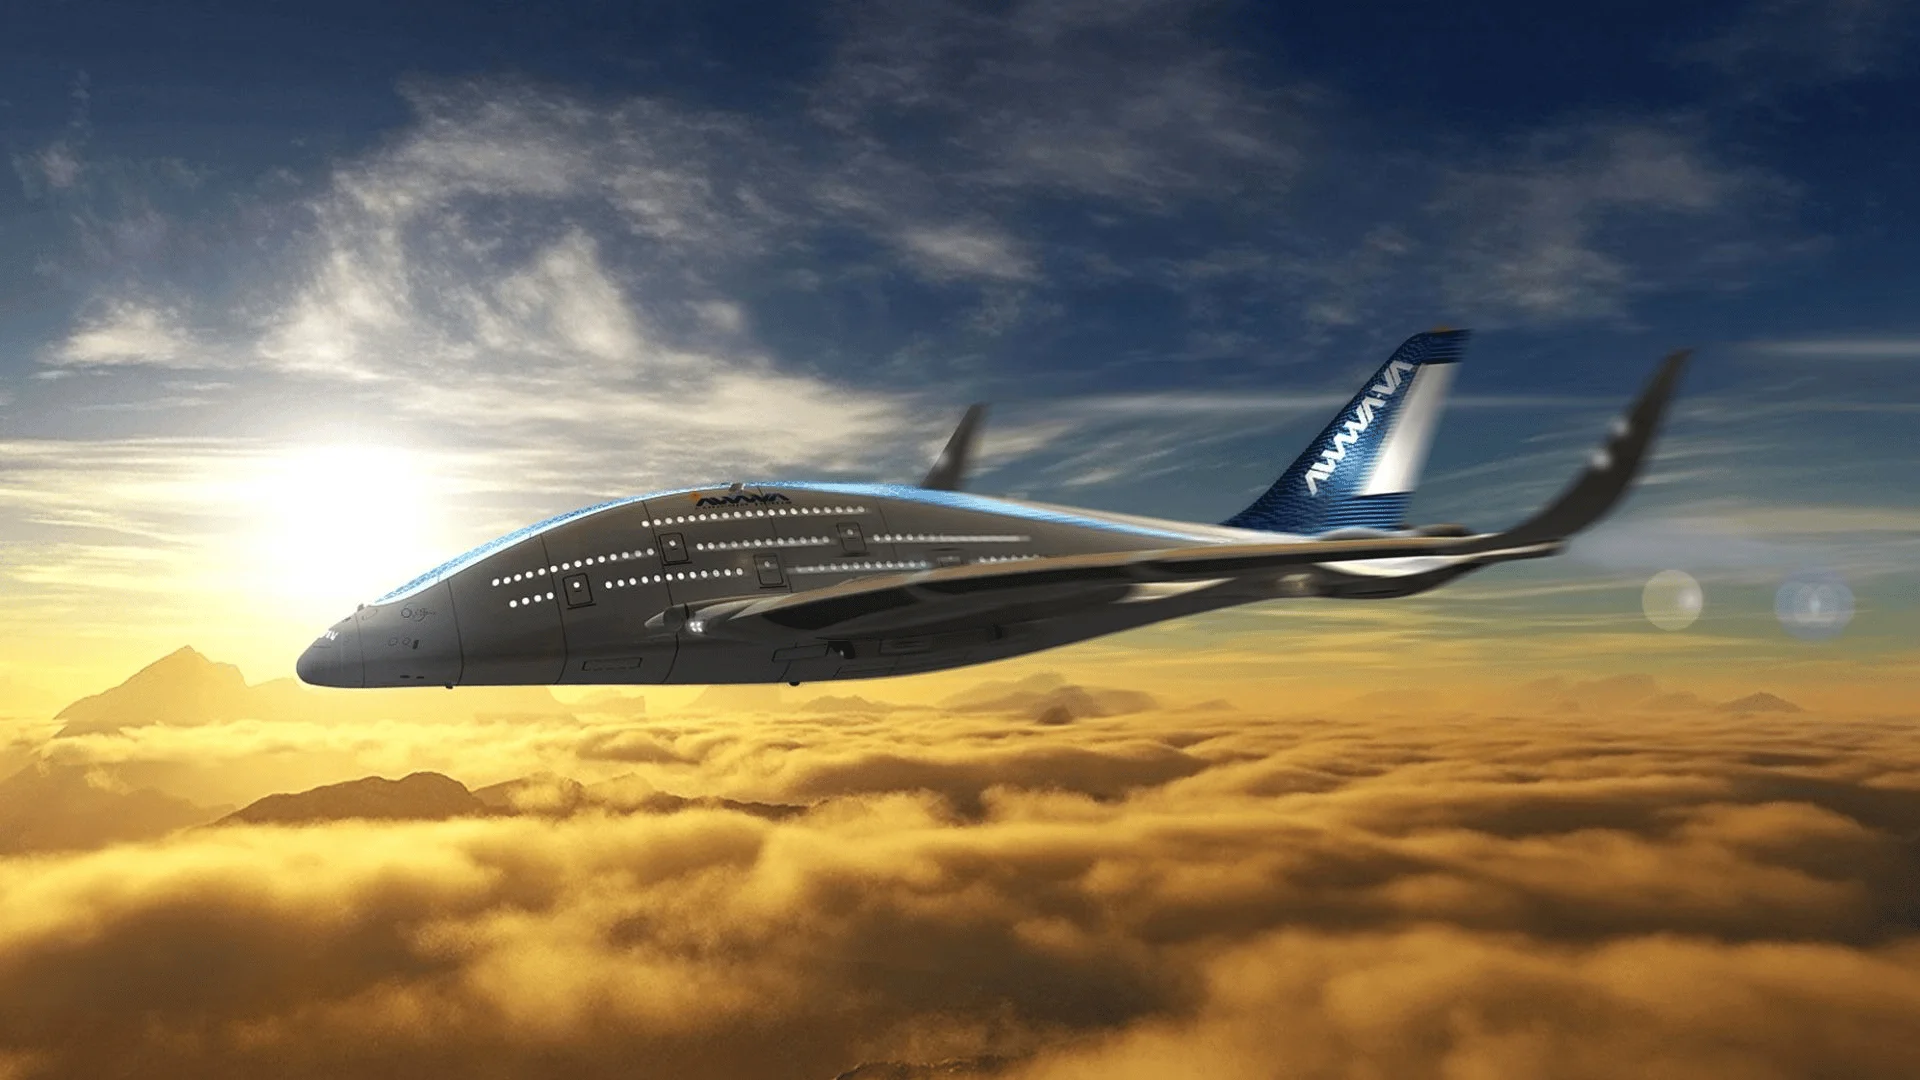 The Spanish company presented the concept of a 3-story aircraft of the future